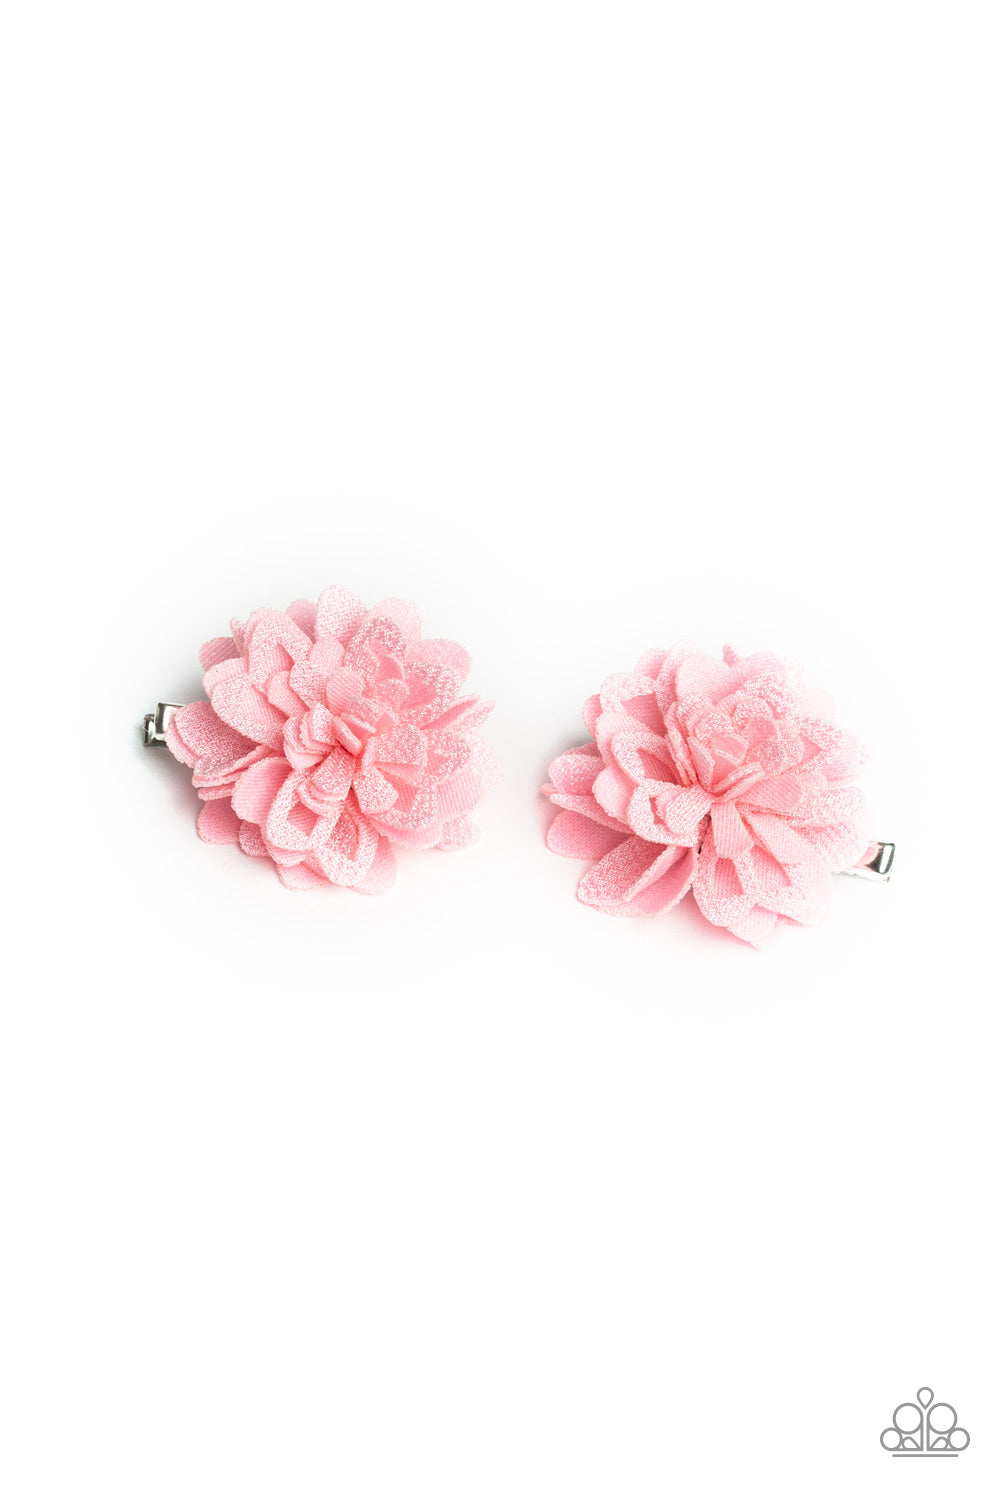 Paparazzi Fauna and Flora Pink Hairbow Duo